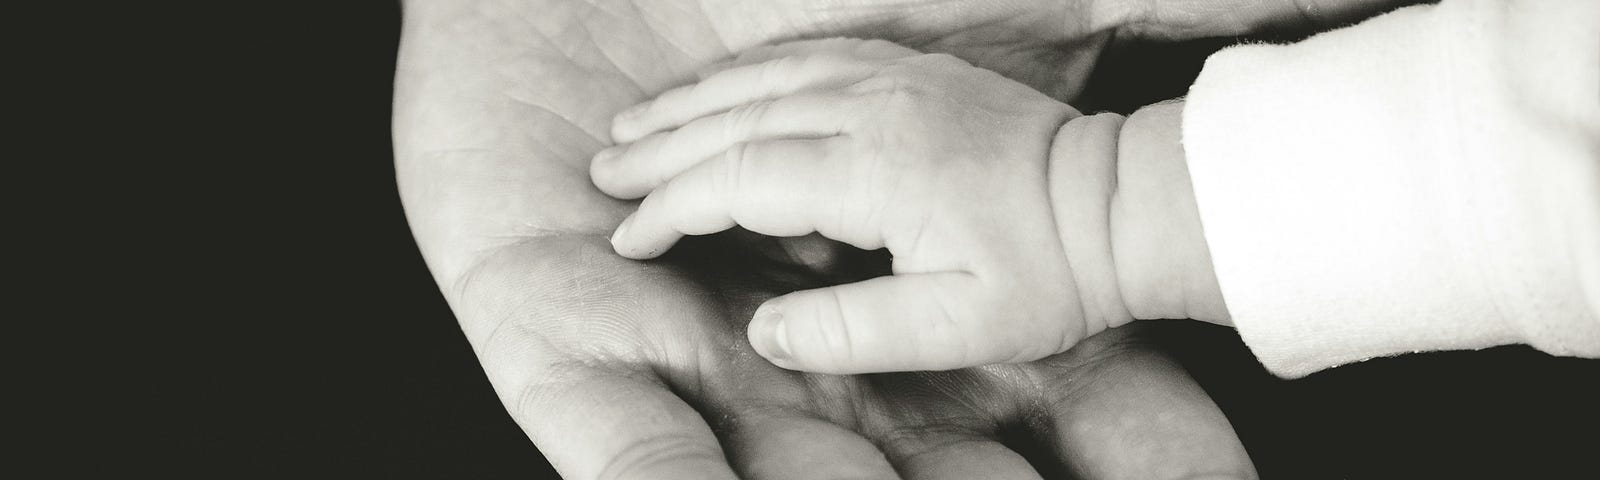 A tiny baby’s hand in a parent’s hand